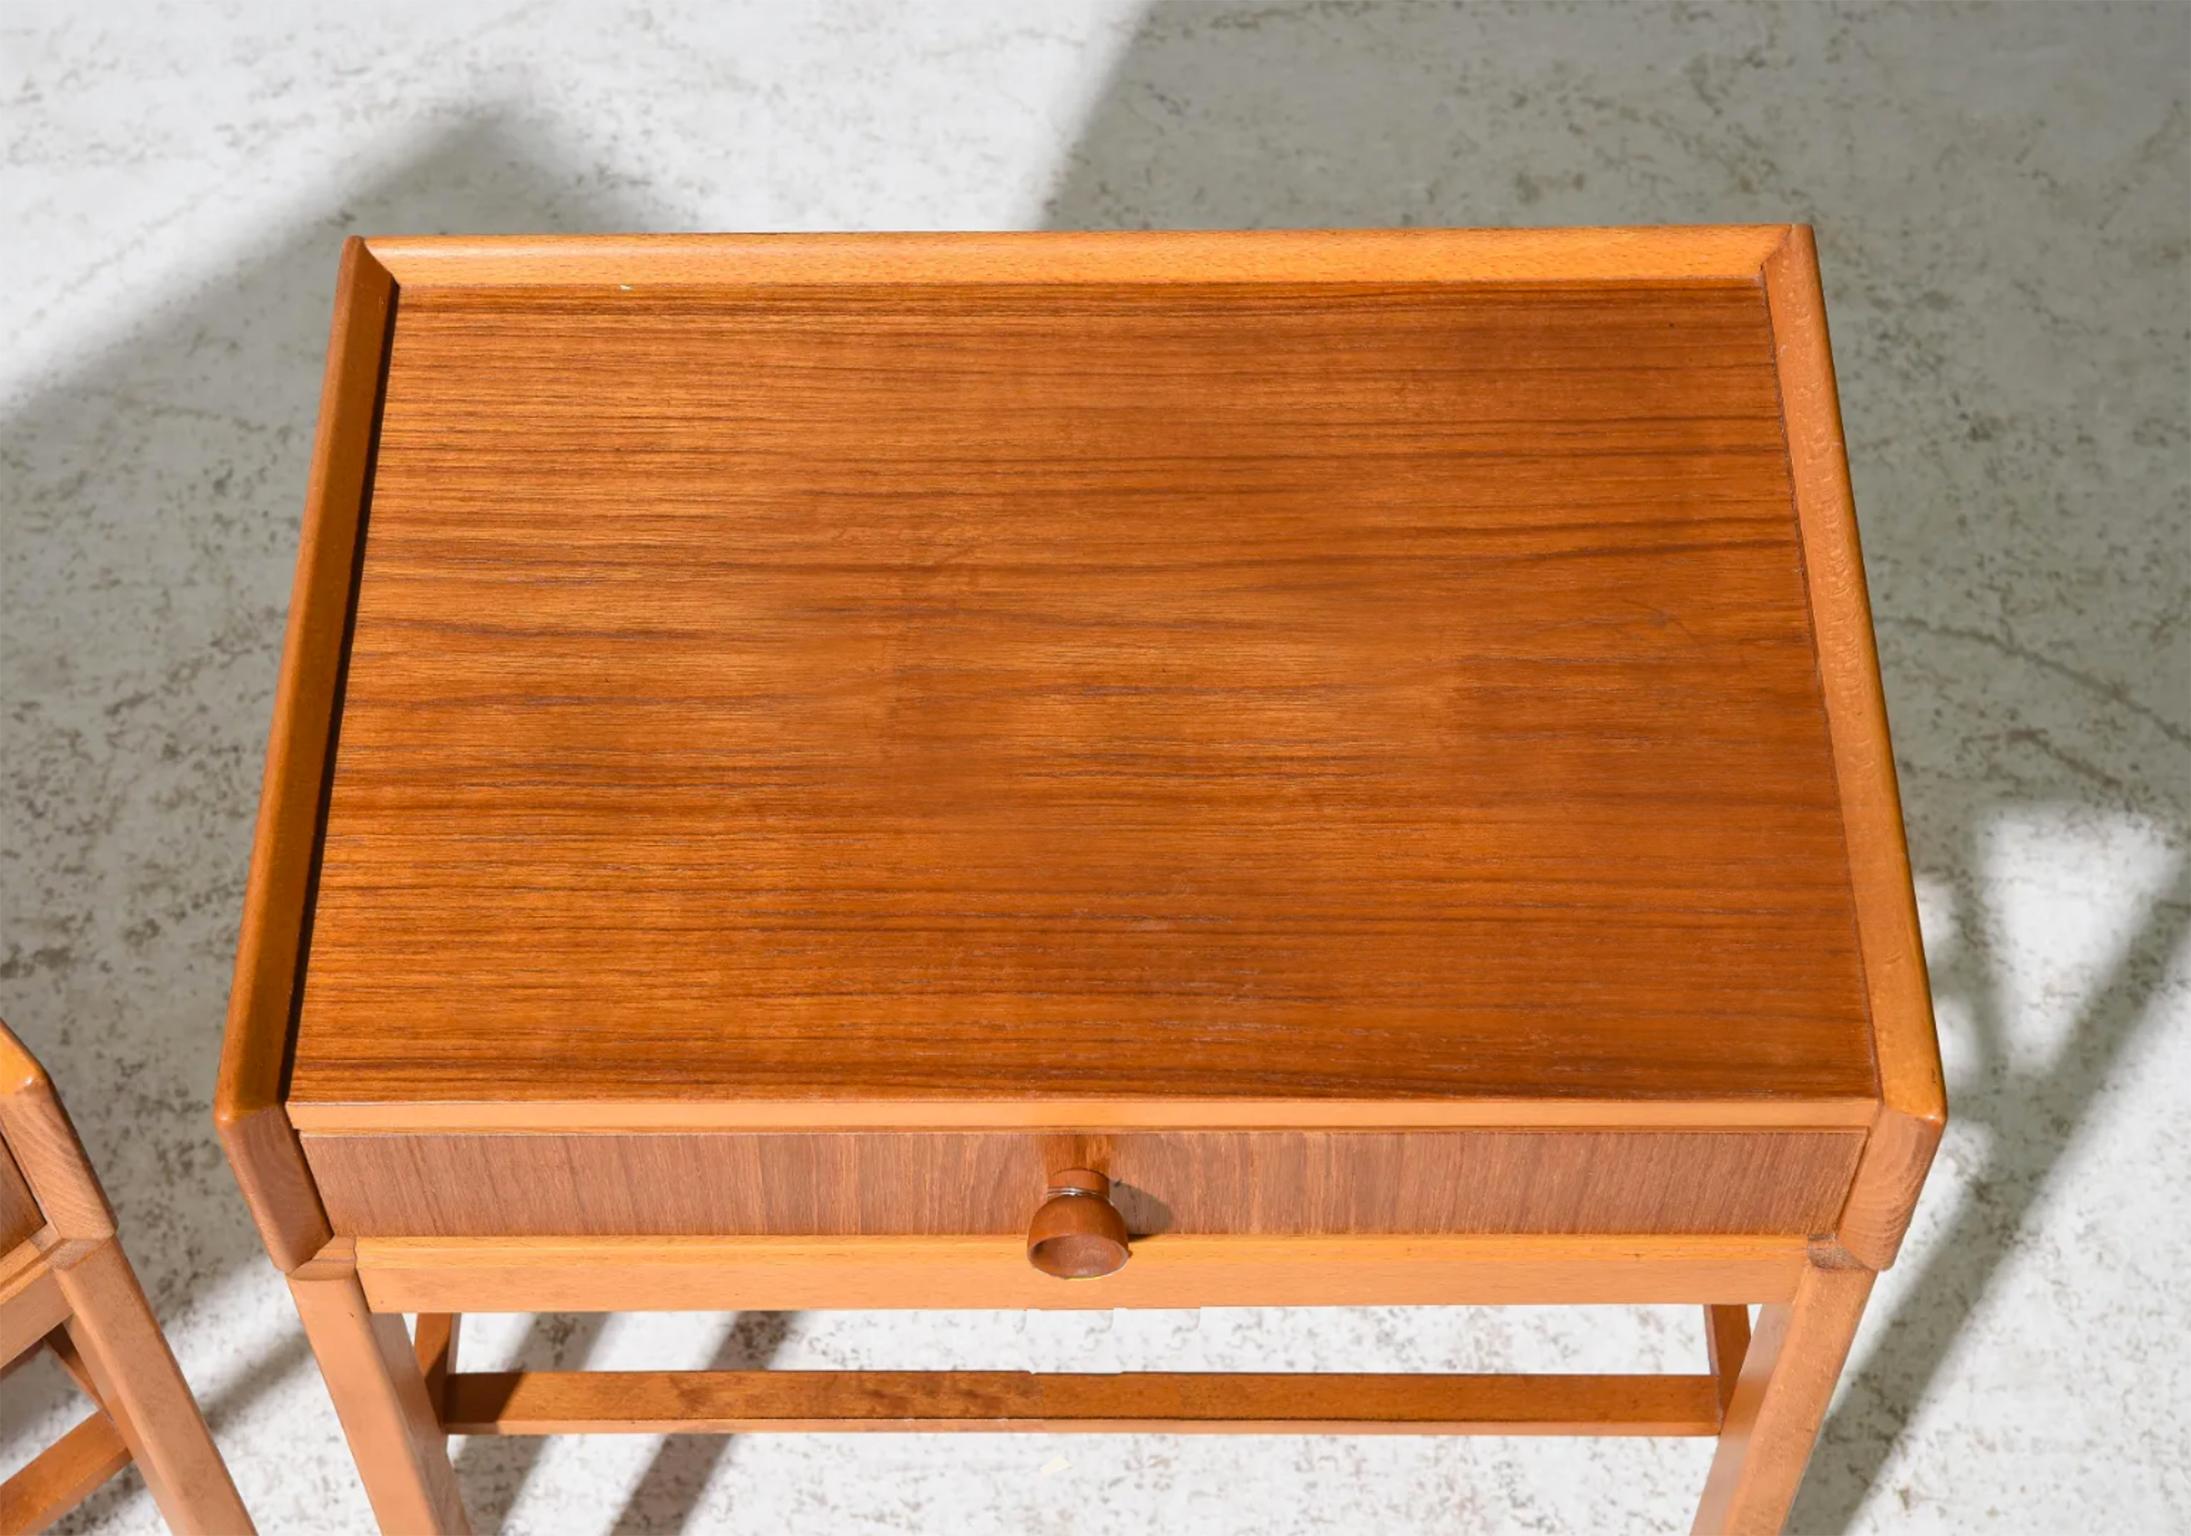 Beautiful pair of Danish modern petite teak nightstands lamp tables with single drawer Minimalist. Very clean set of rare nightstands. Simple delicate design with tapered knob lower slatted shelf as well as a lipped top surface, all solid teak. You